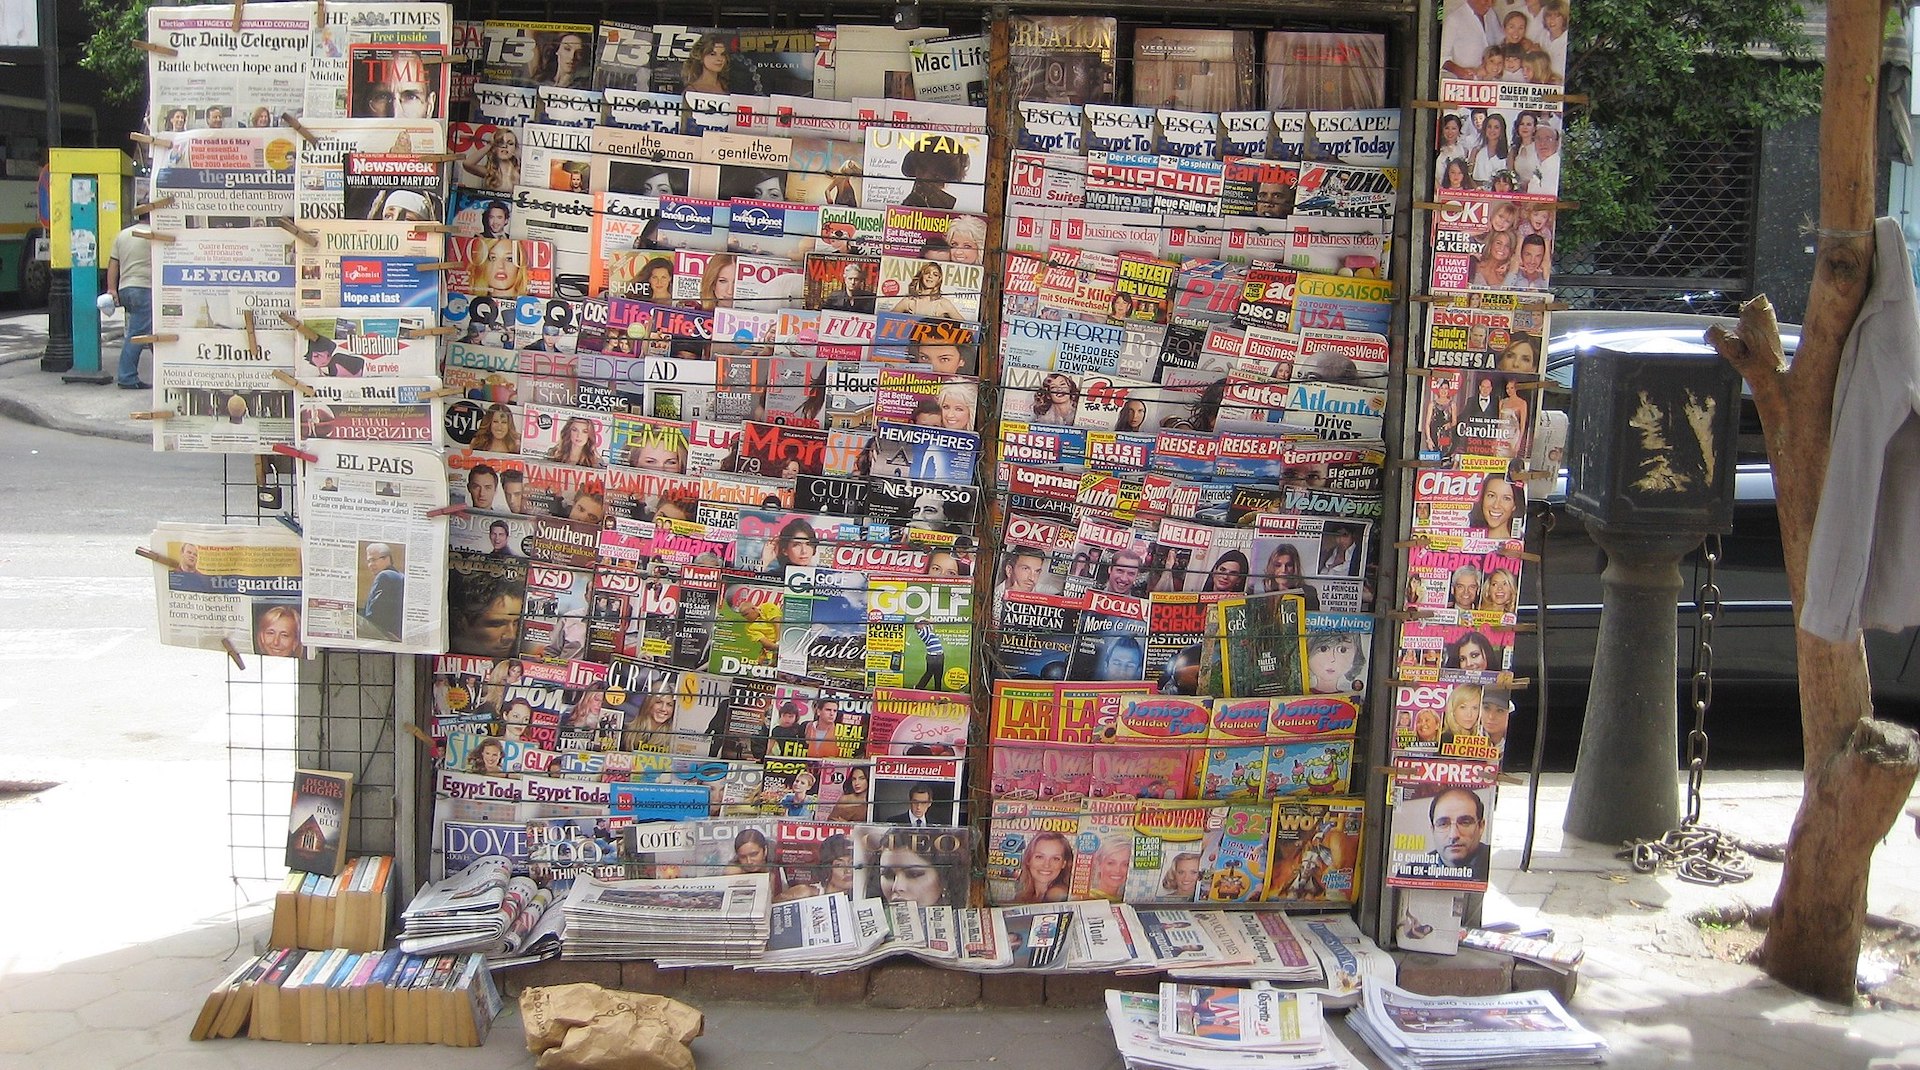 A newstand in Cairo. Publishers are exploring bundling their content together to capture more revenue from readers looking to simplify their subscriptions. Photo by flyvancity via Wikimedia Commons